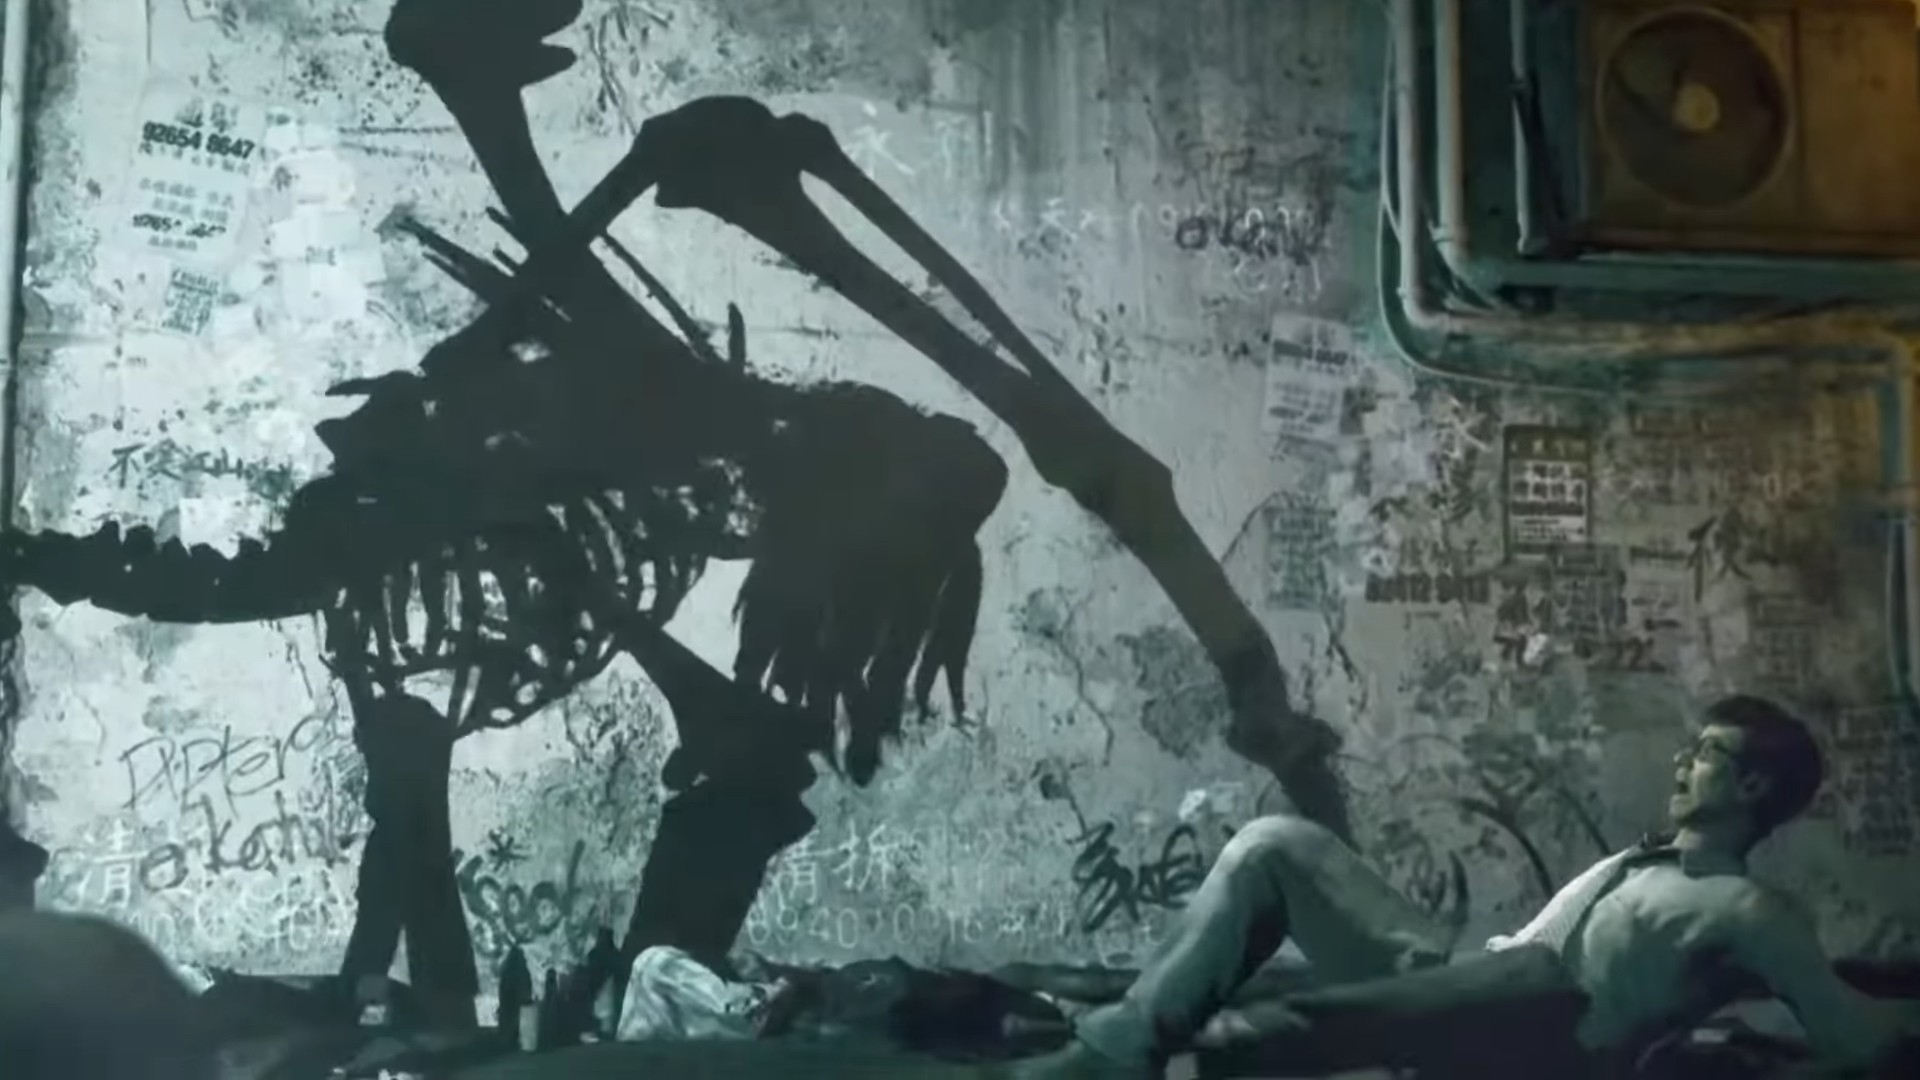 Everything we know about Slitterhead, the new horror game from the creator of Silent Hill